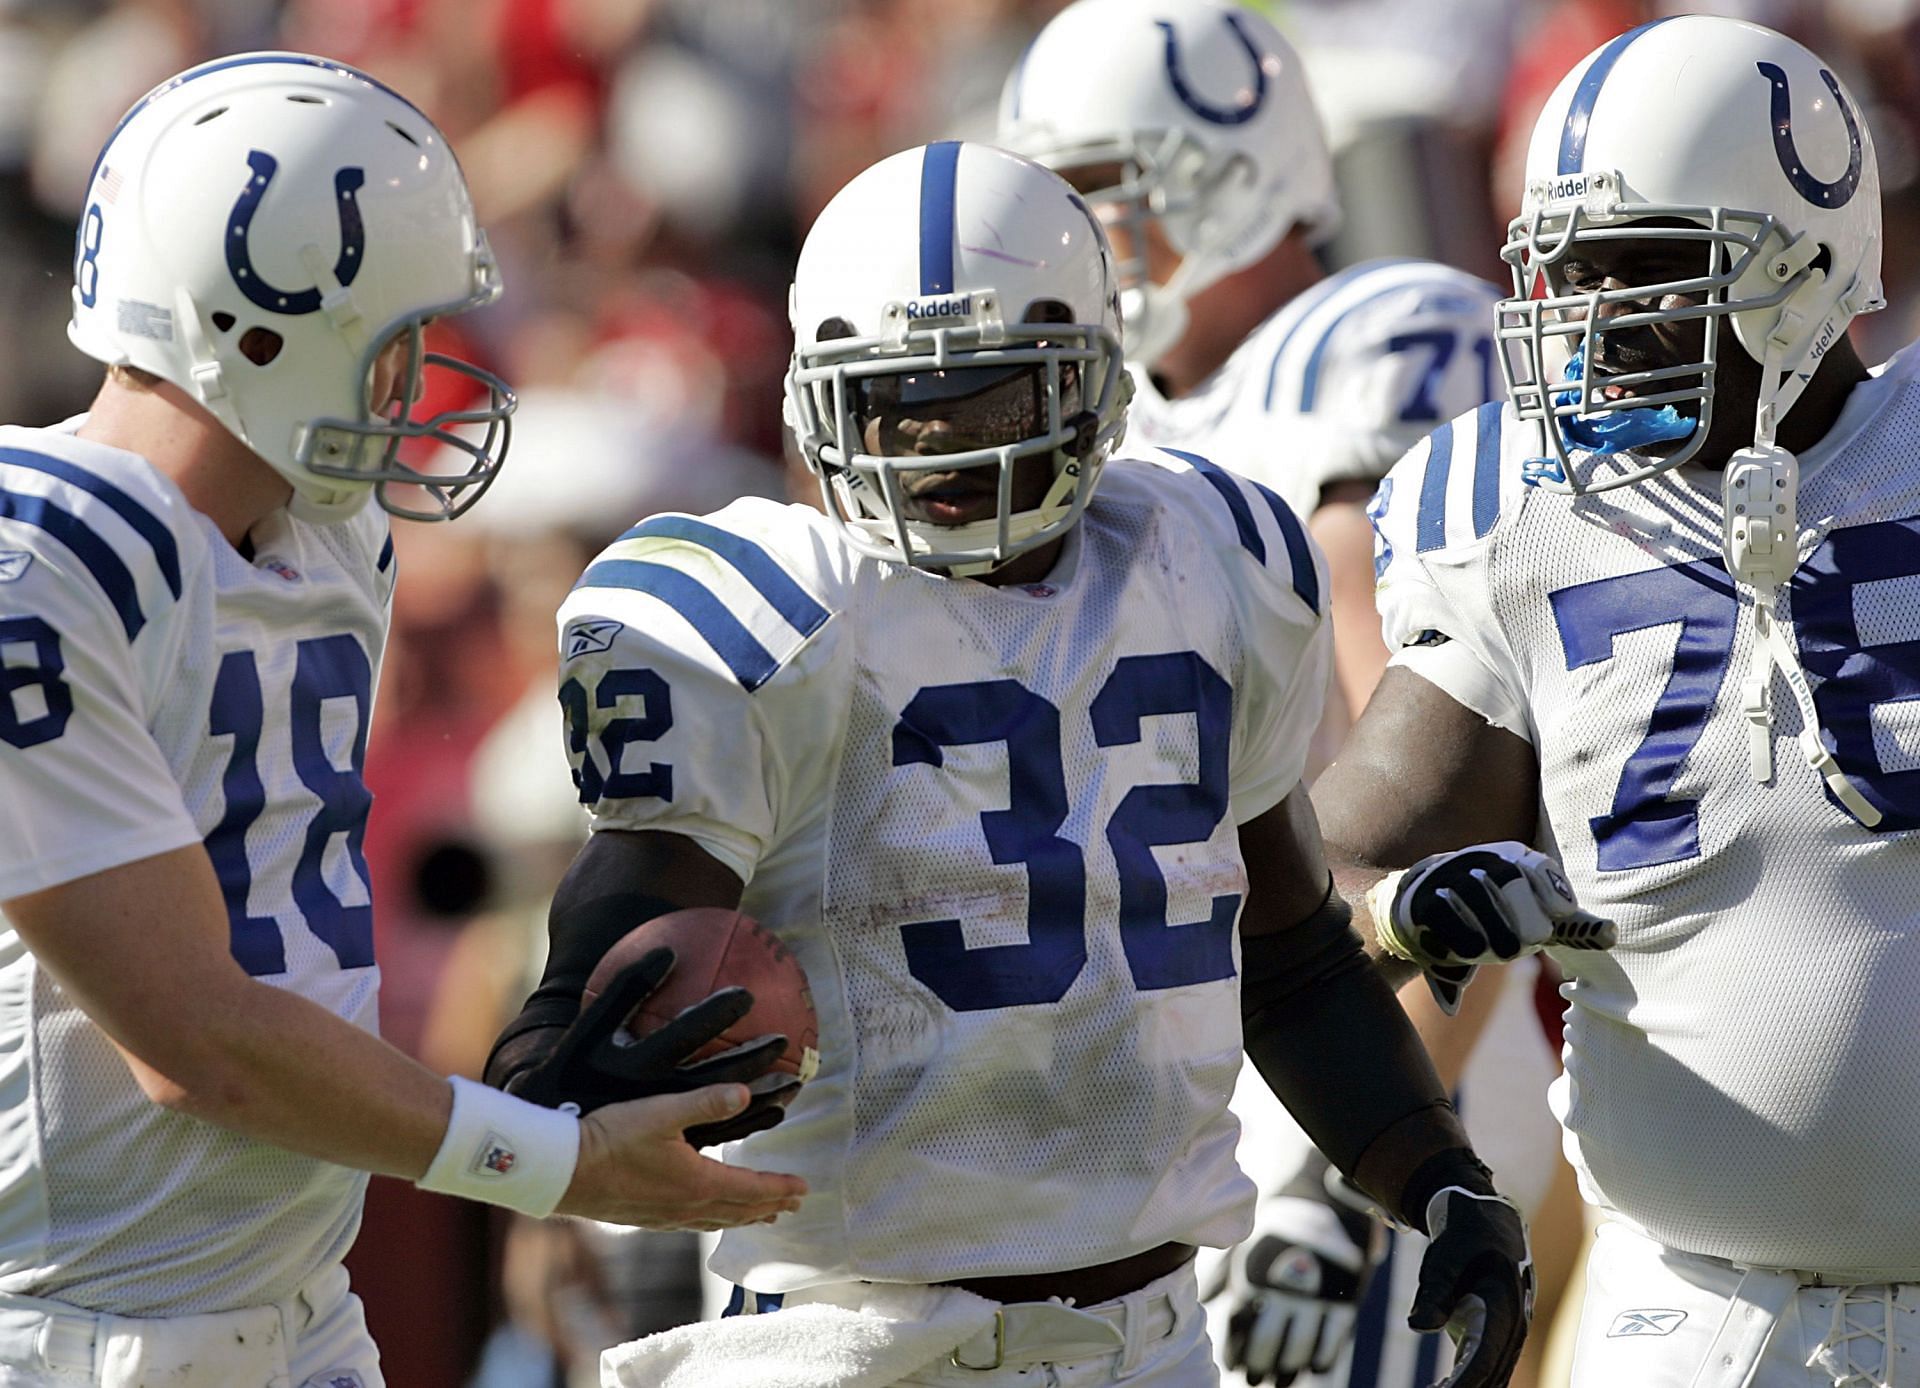 The Indianapolis Colts&#039; Peyton Manning and Edgerrin James